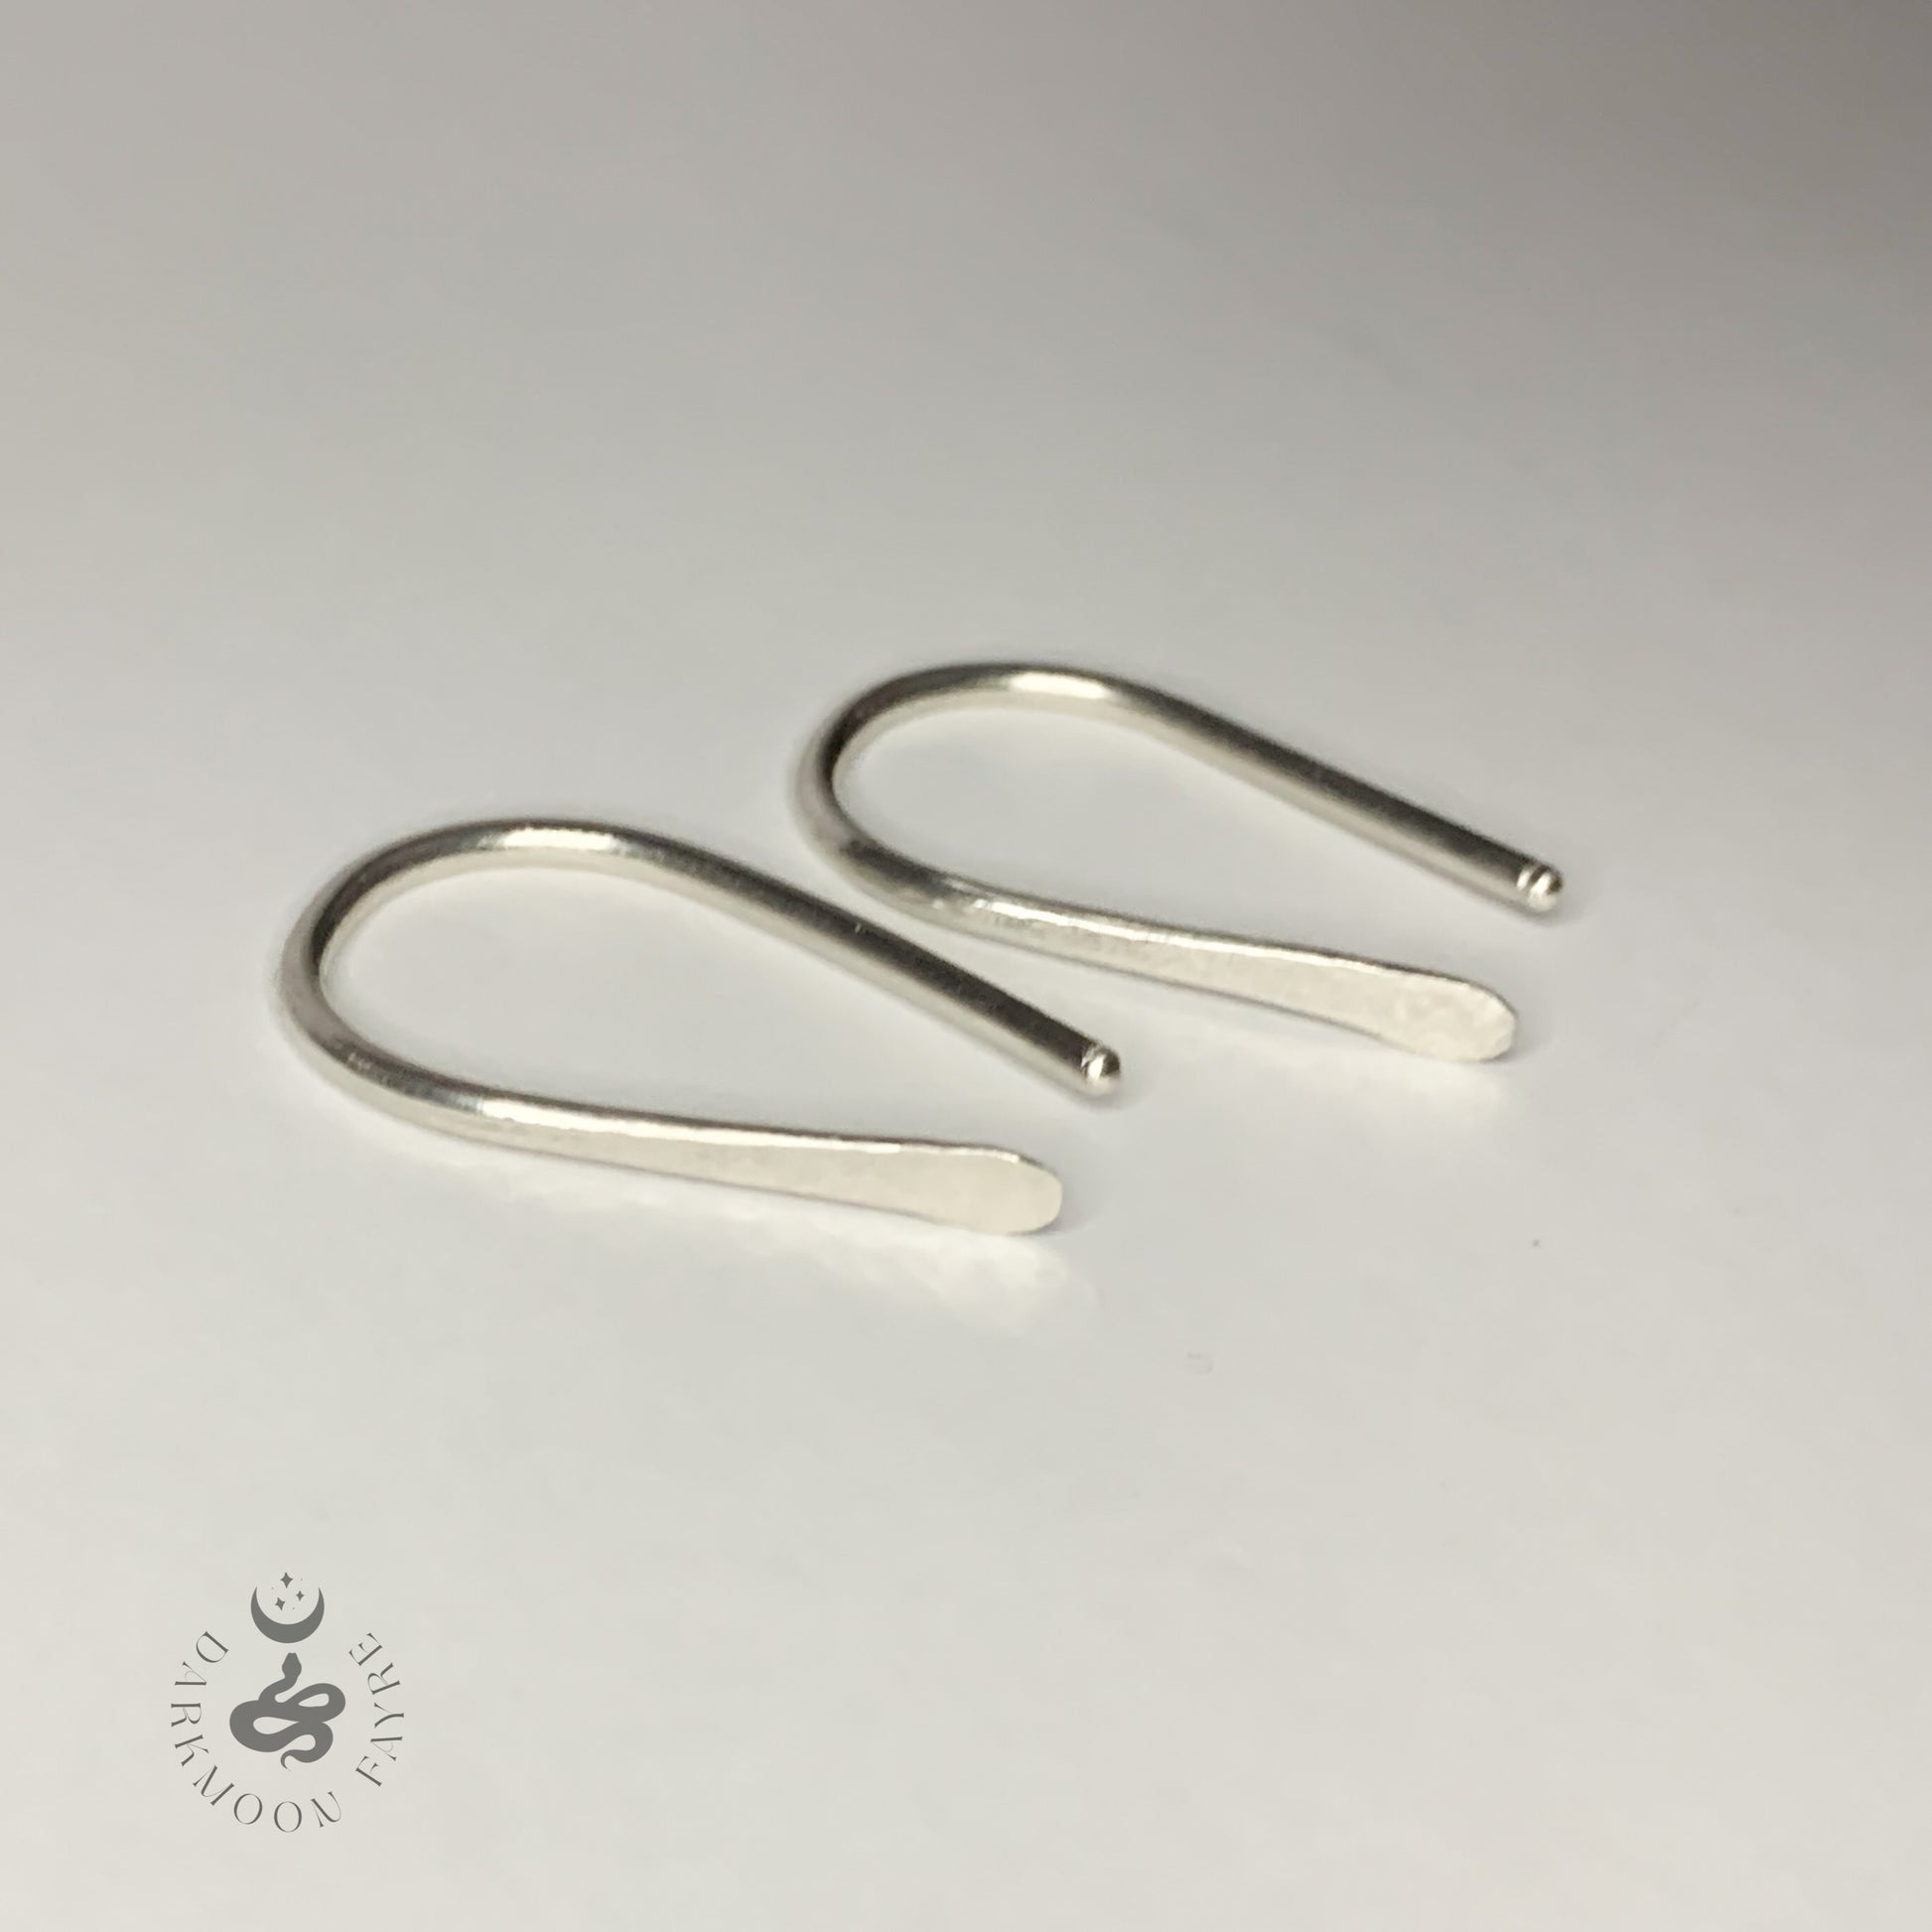 Genuine Real 925 Sterling Silver, Fish Hook Earring Wires